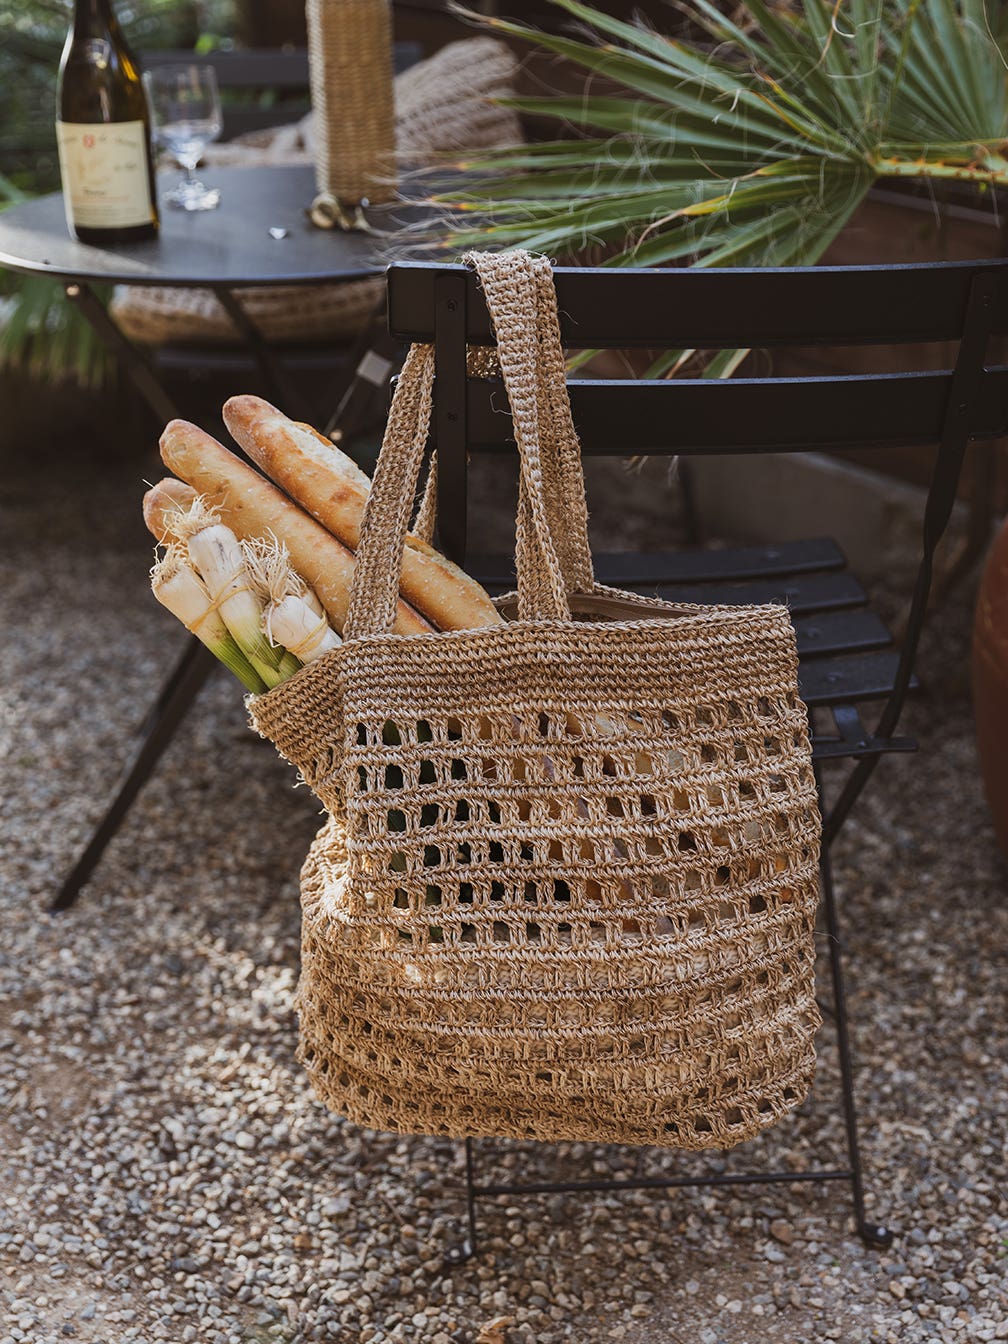 This New Tote Makes Hauling 3 Bottles of Wine to a Picnic a Breeze